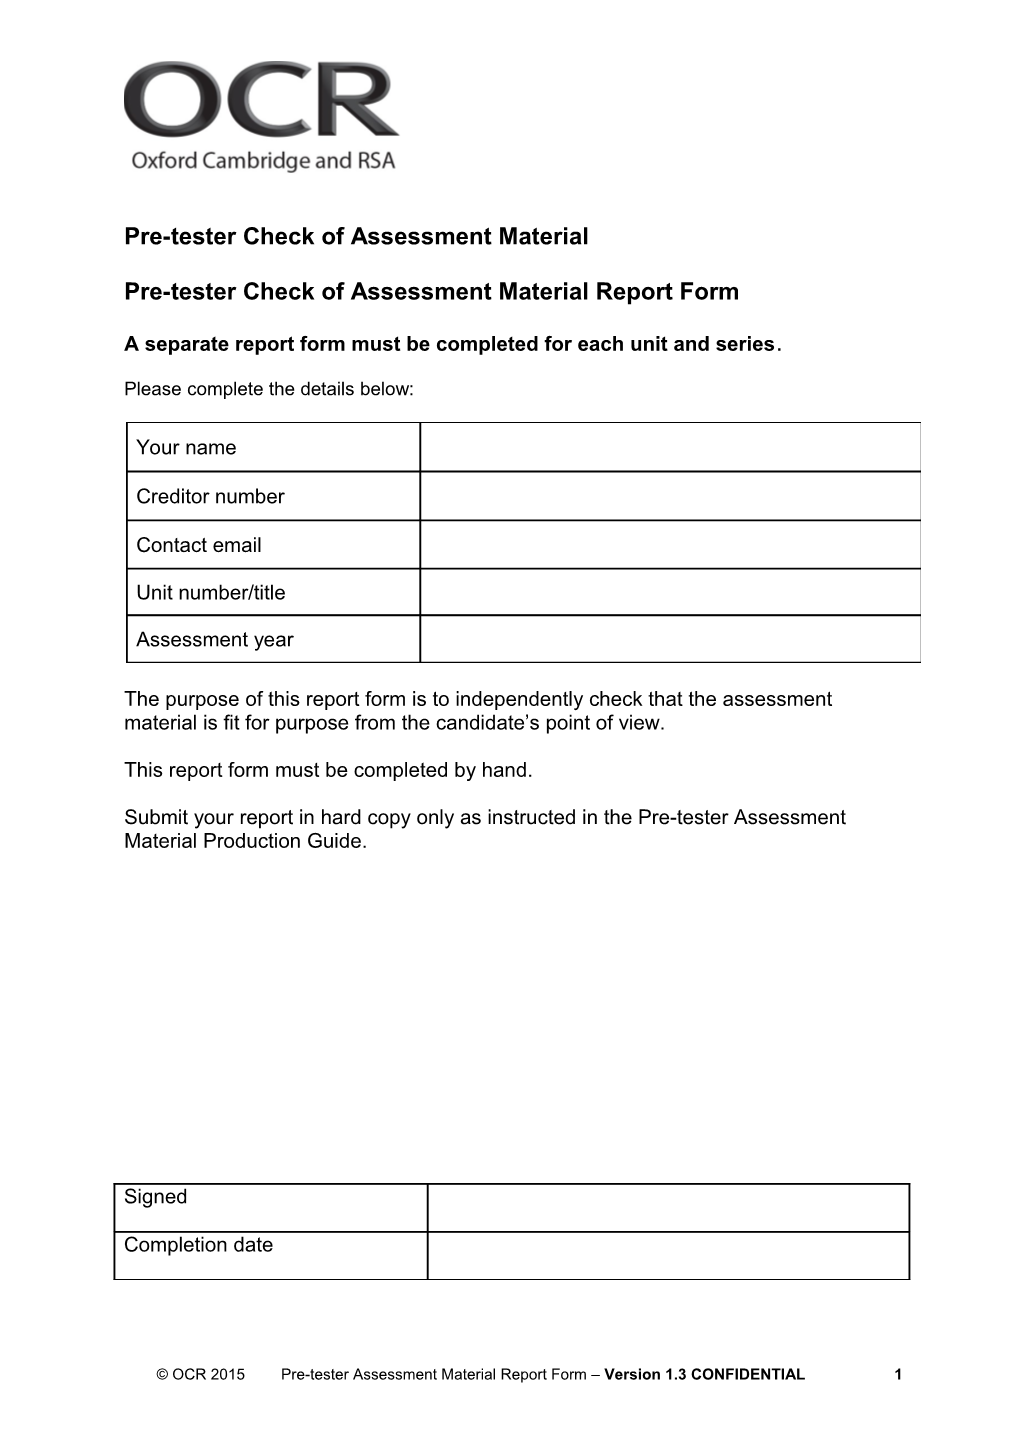 Pre-Tester Check of Assessment Material Report Form